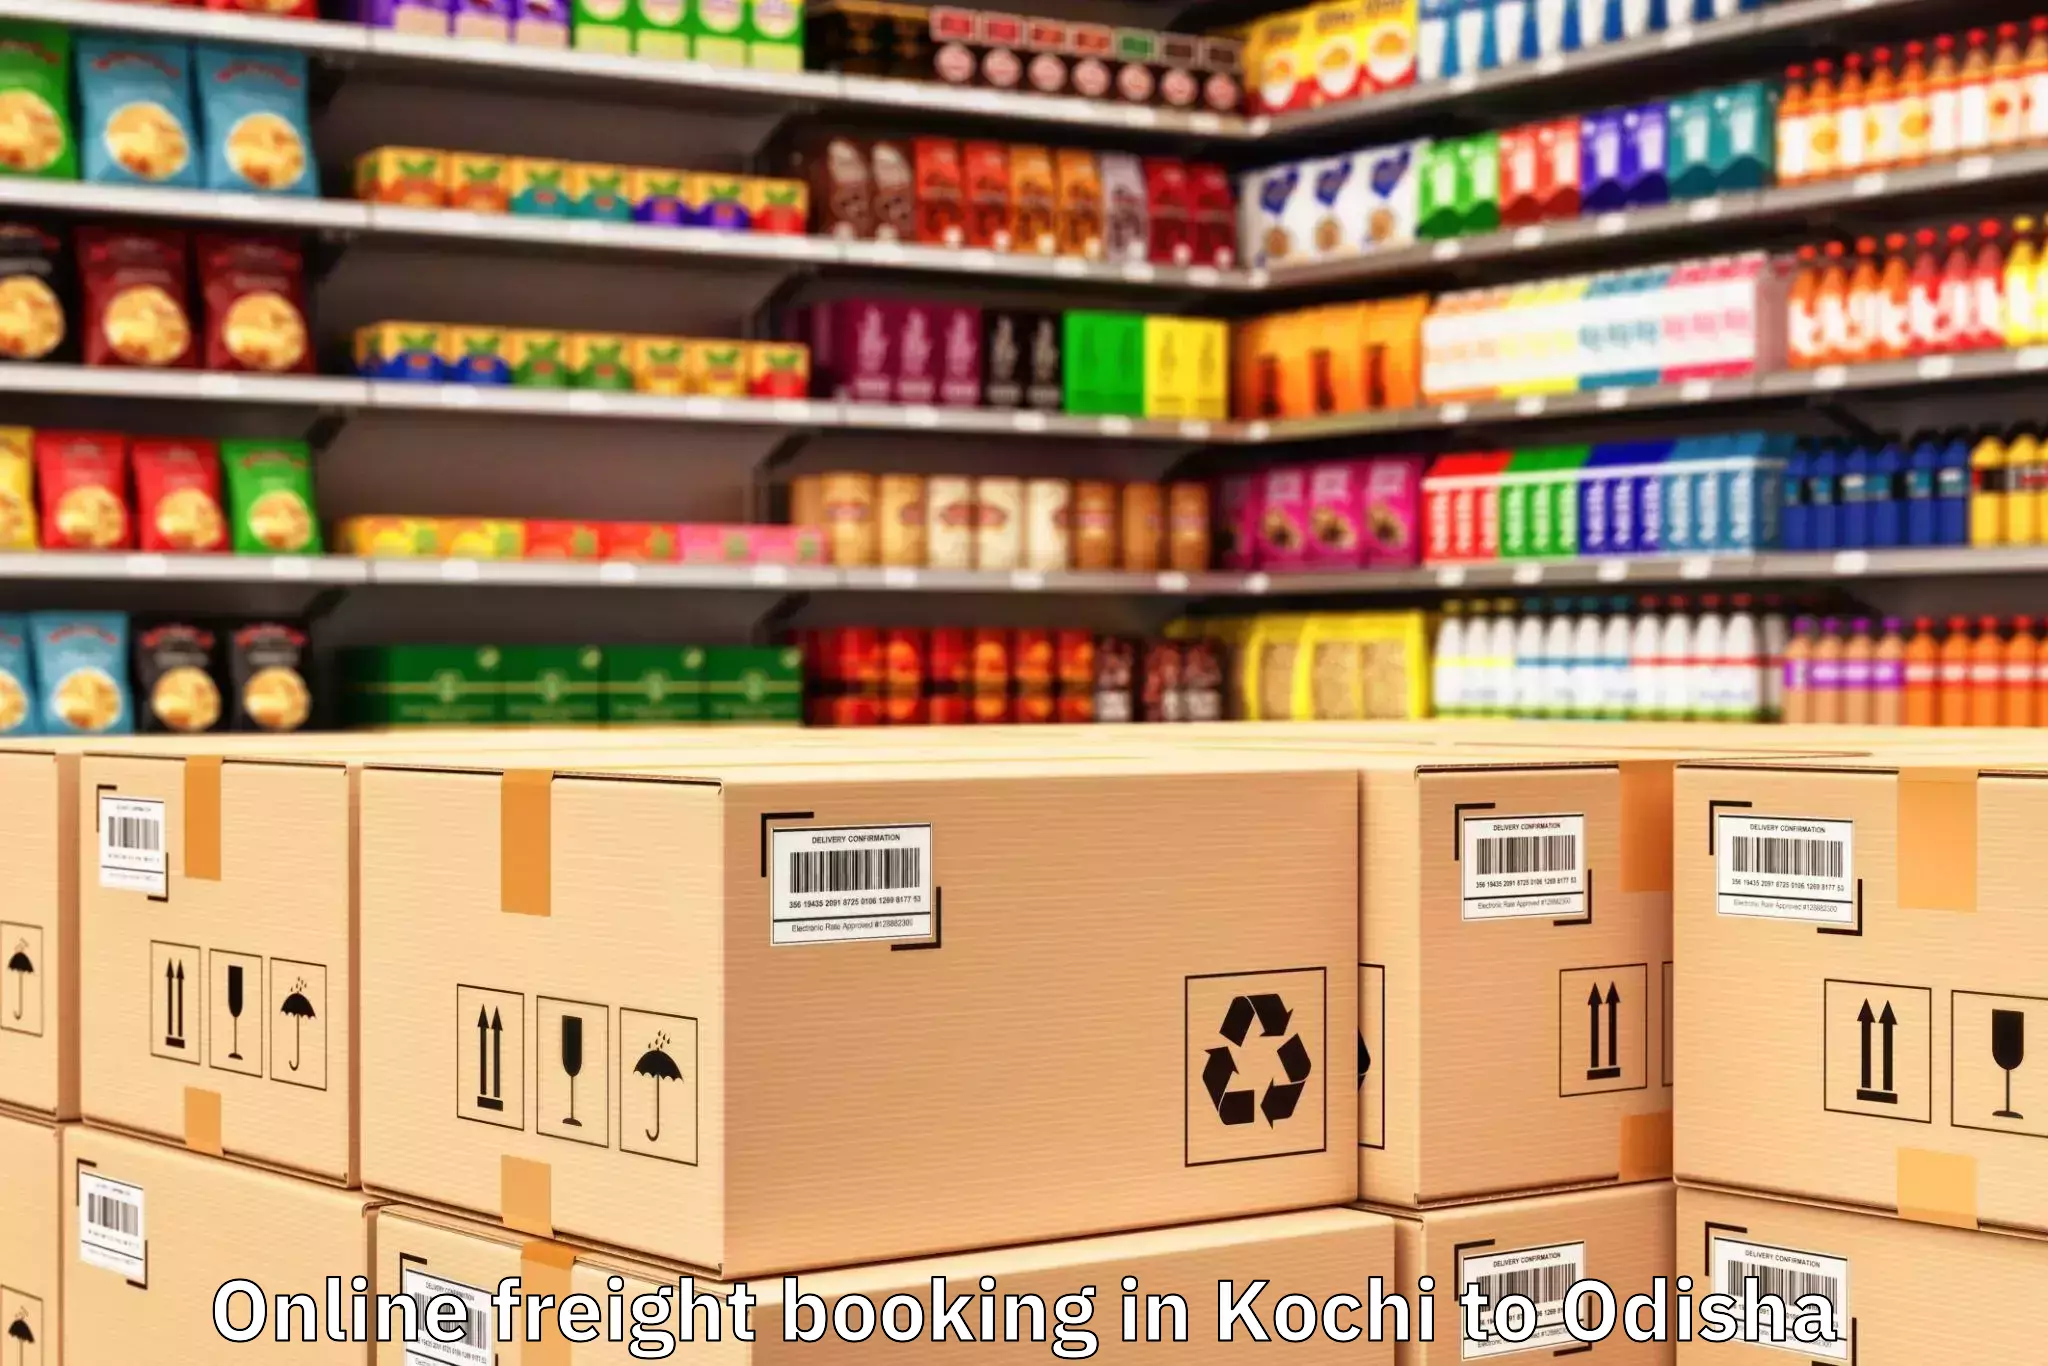 Top Kochi to Joda Online Freight Booking Available